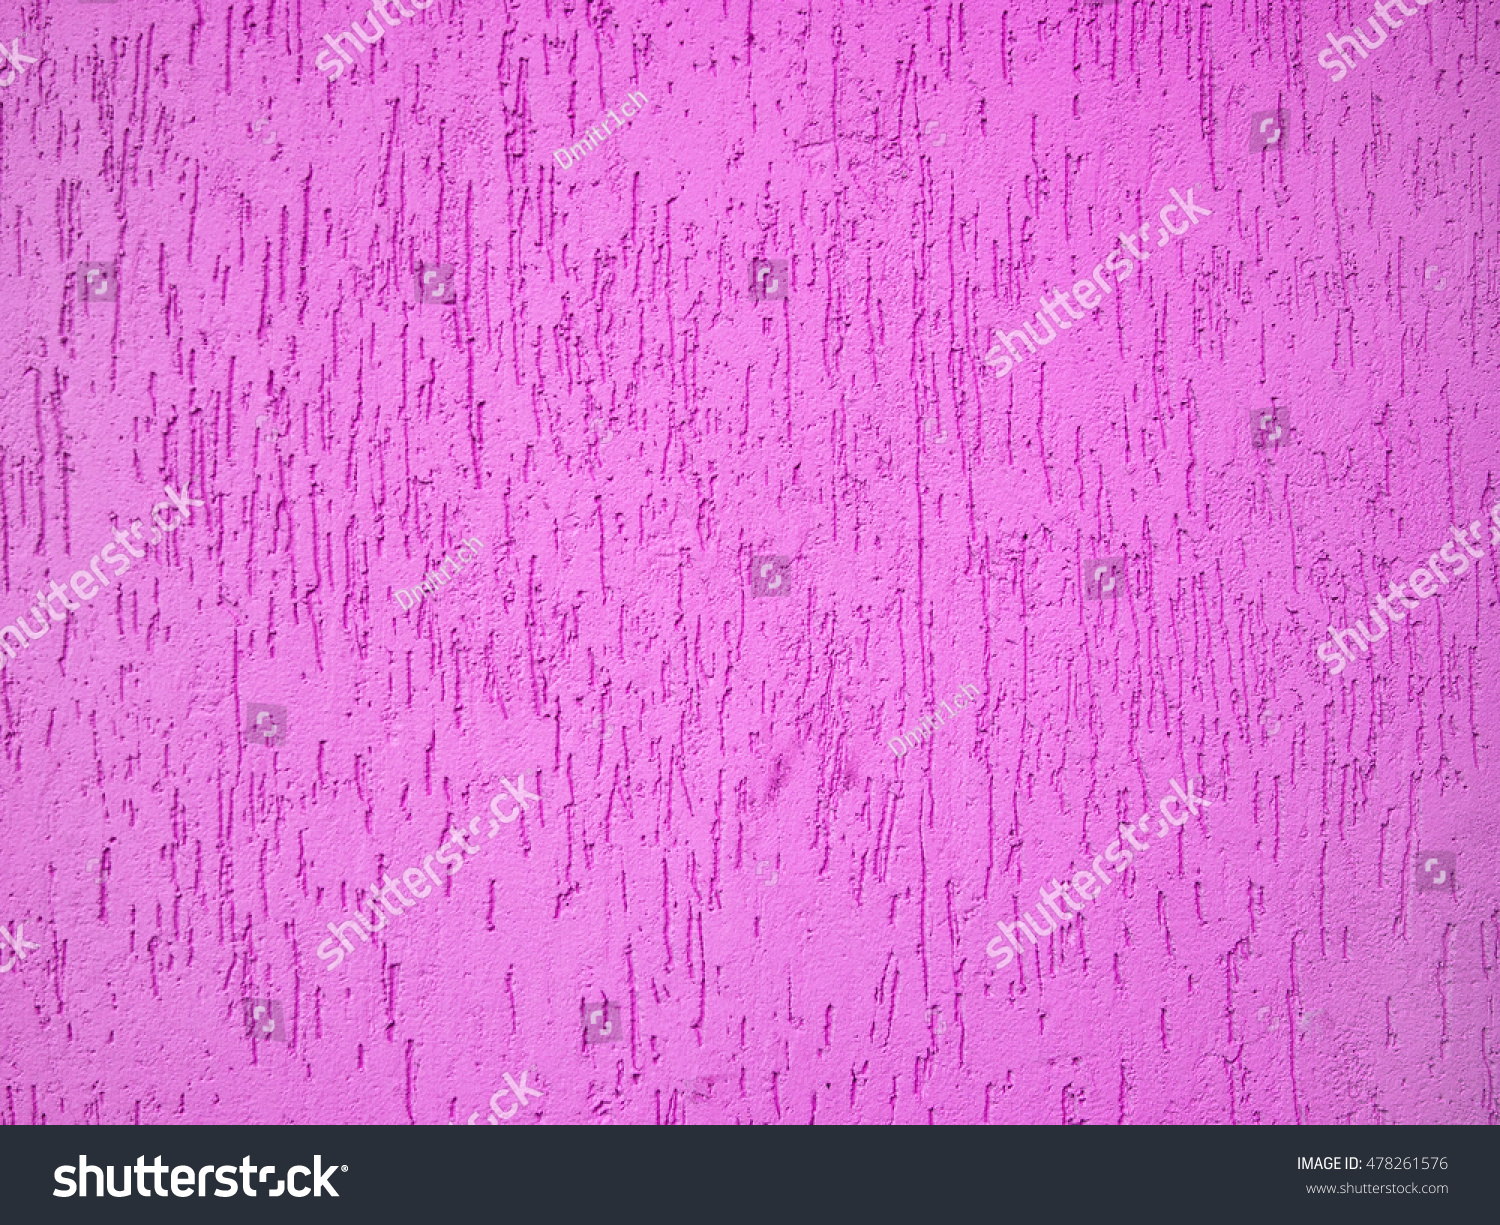 Painted pink color wall fragment as a texture background #478261576